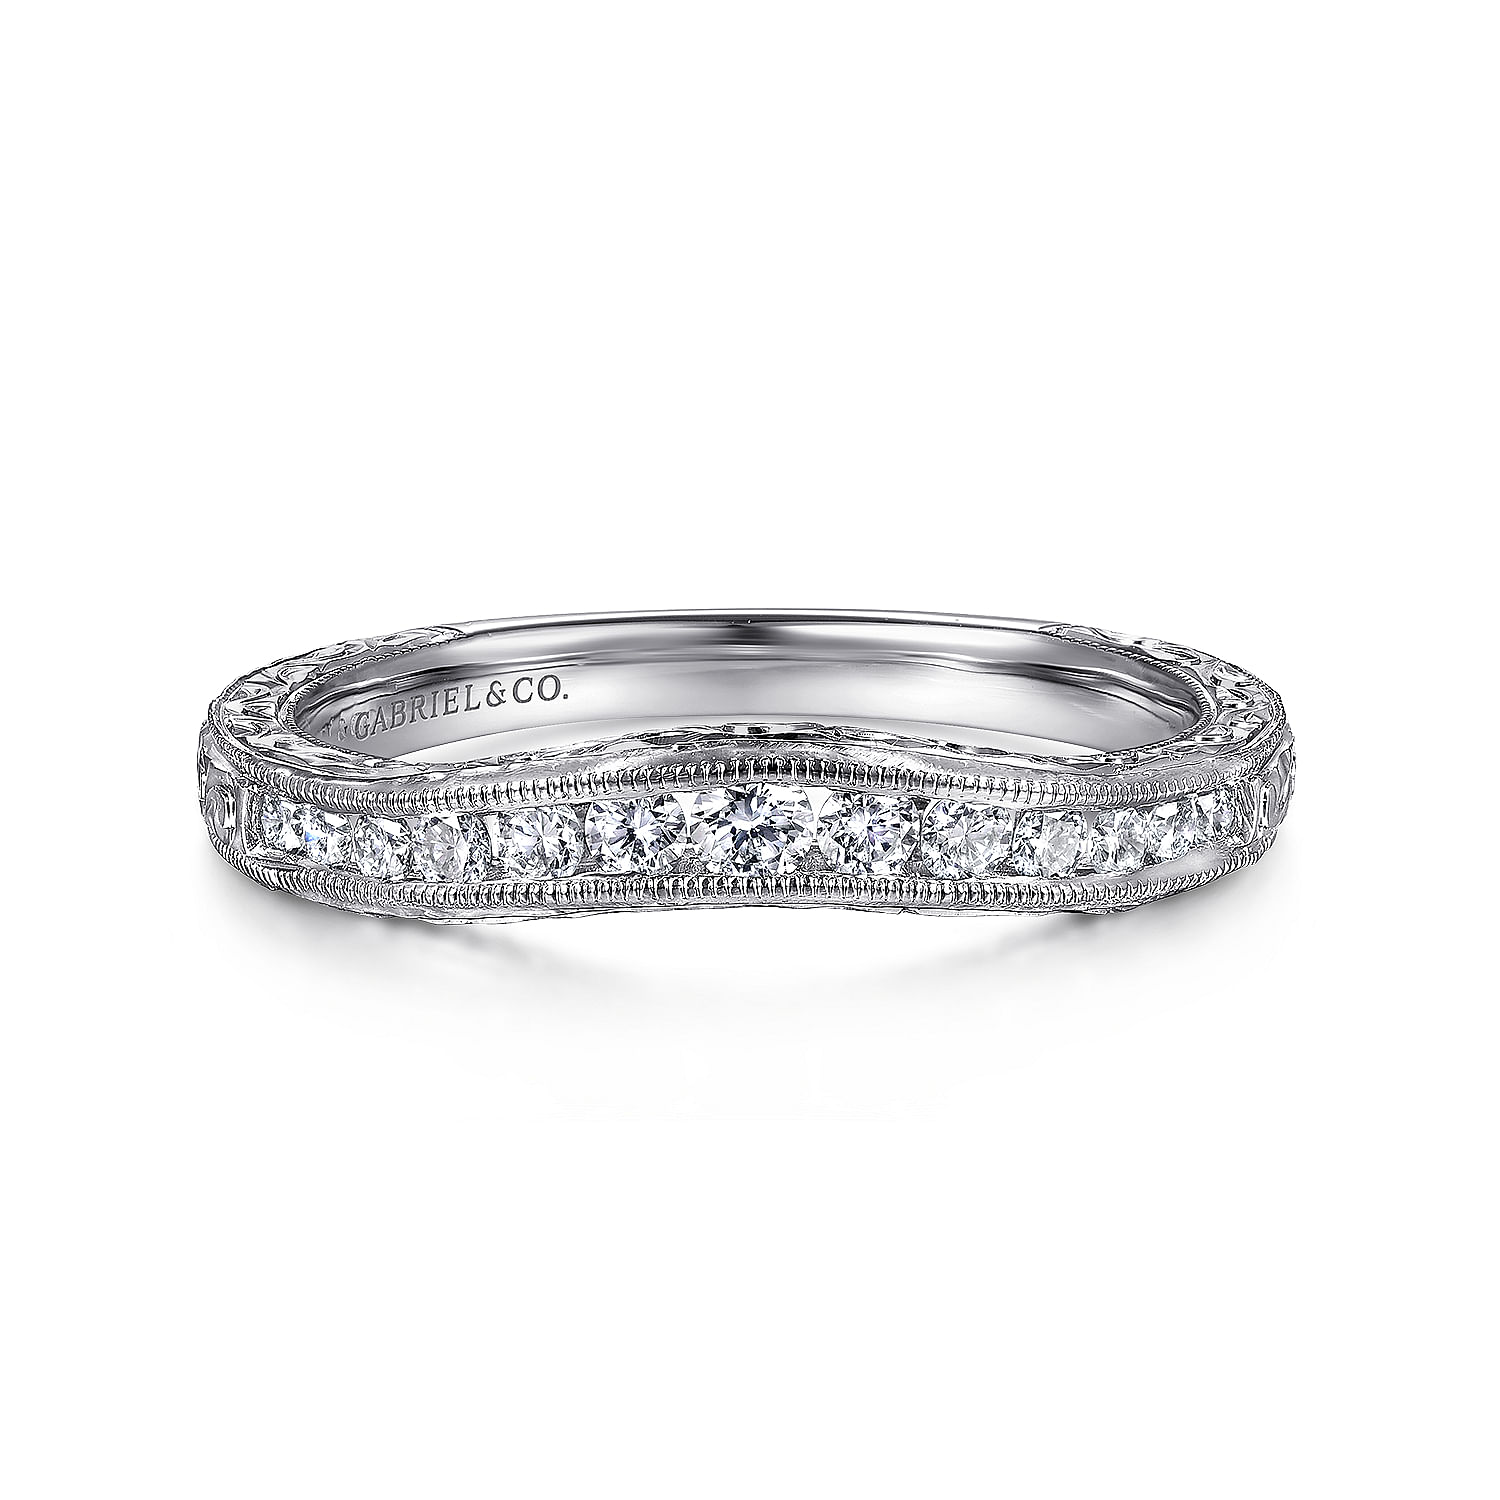 Gabriel - Vintage Inspired 14K White Gold Curved Channel Set Diamond Wedding Band with Engraving